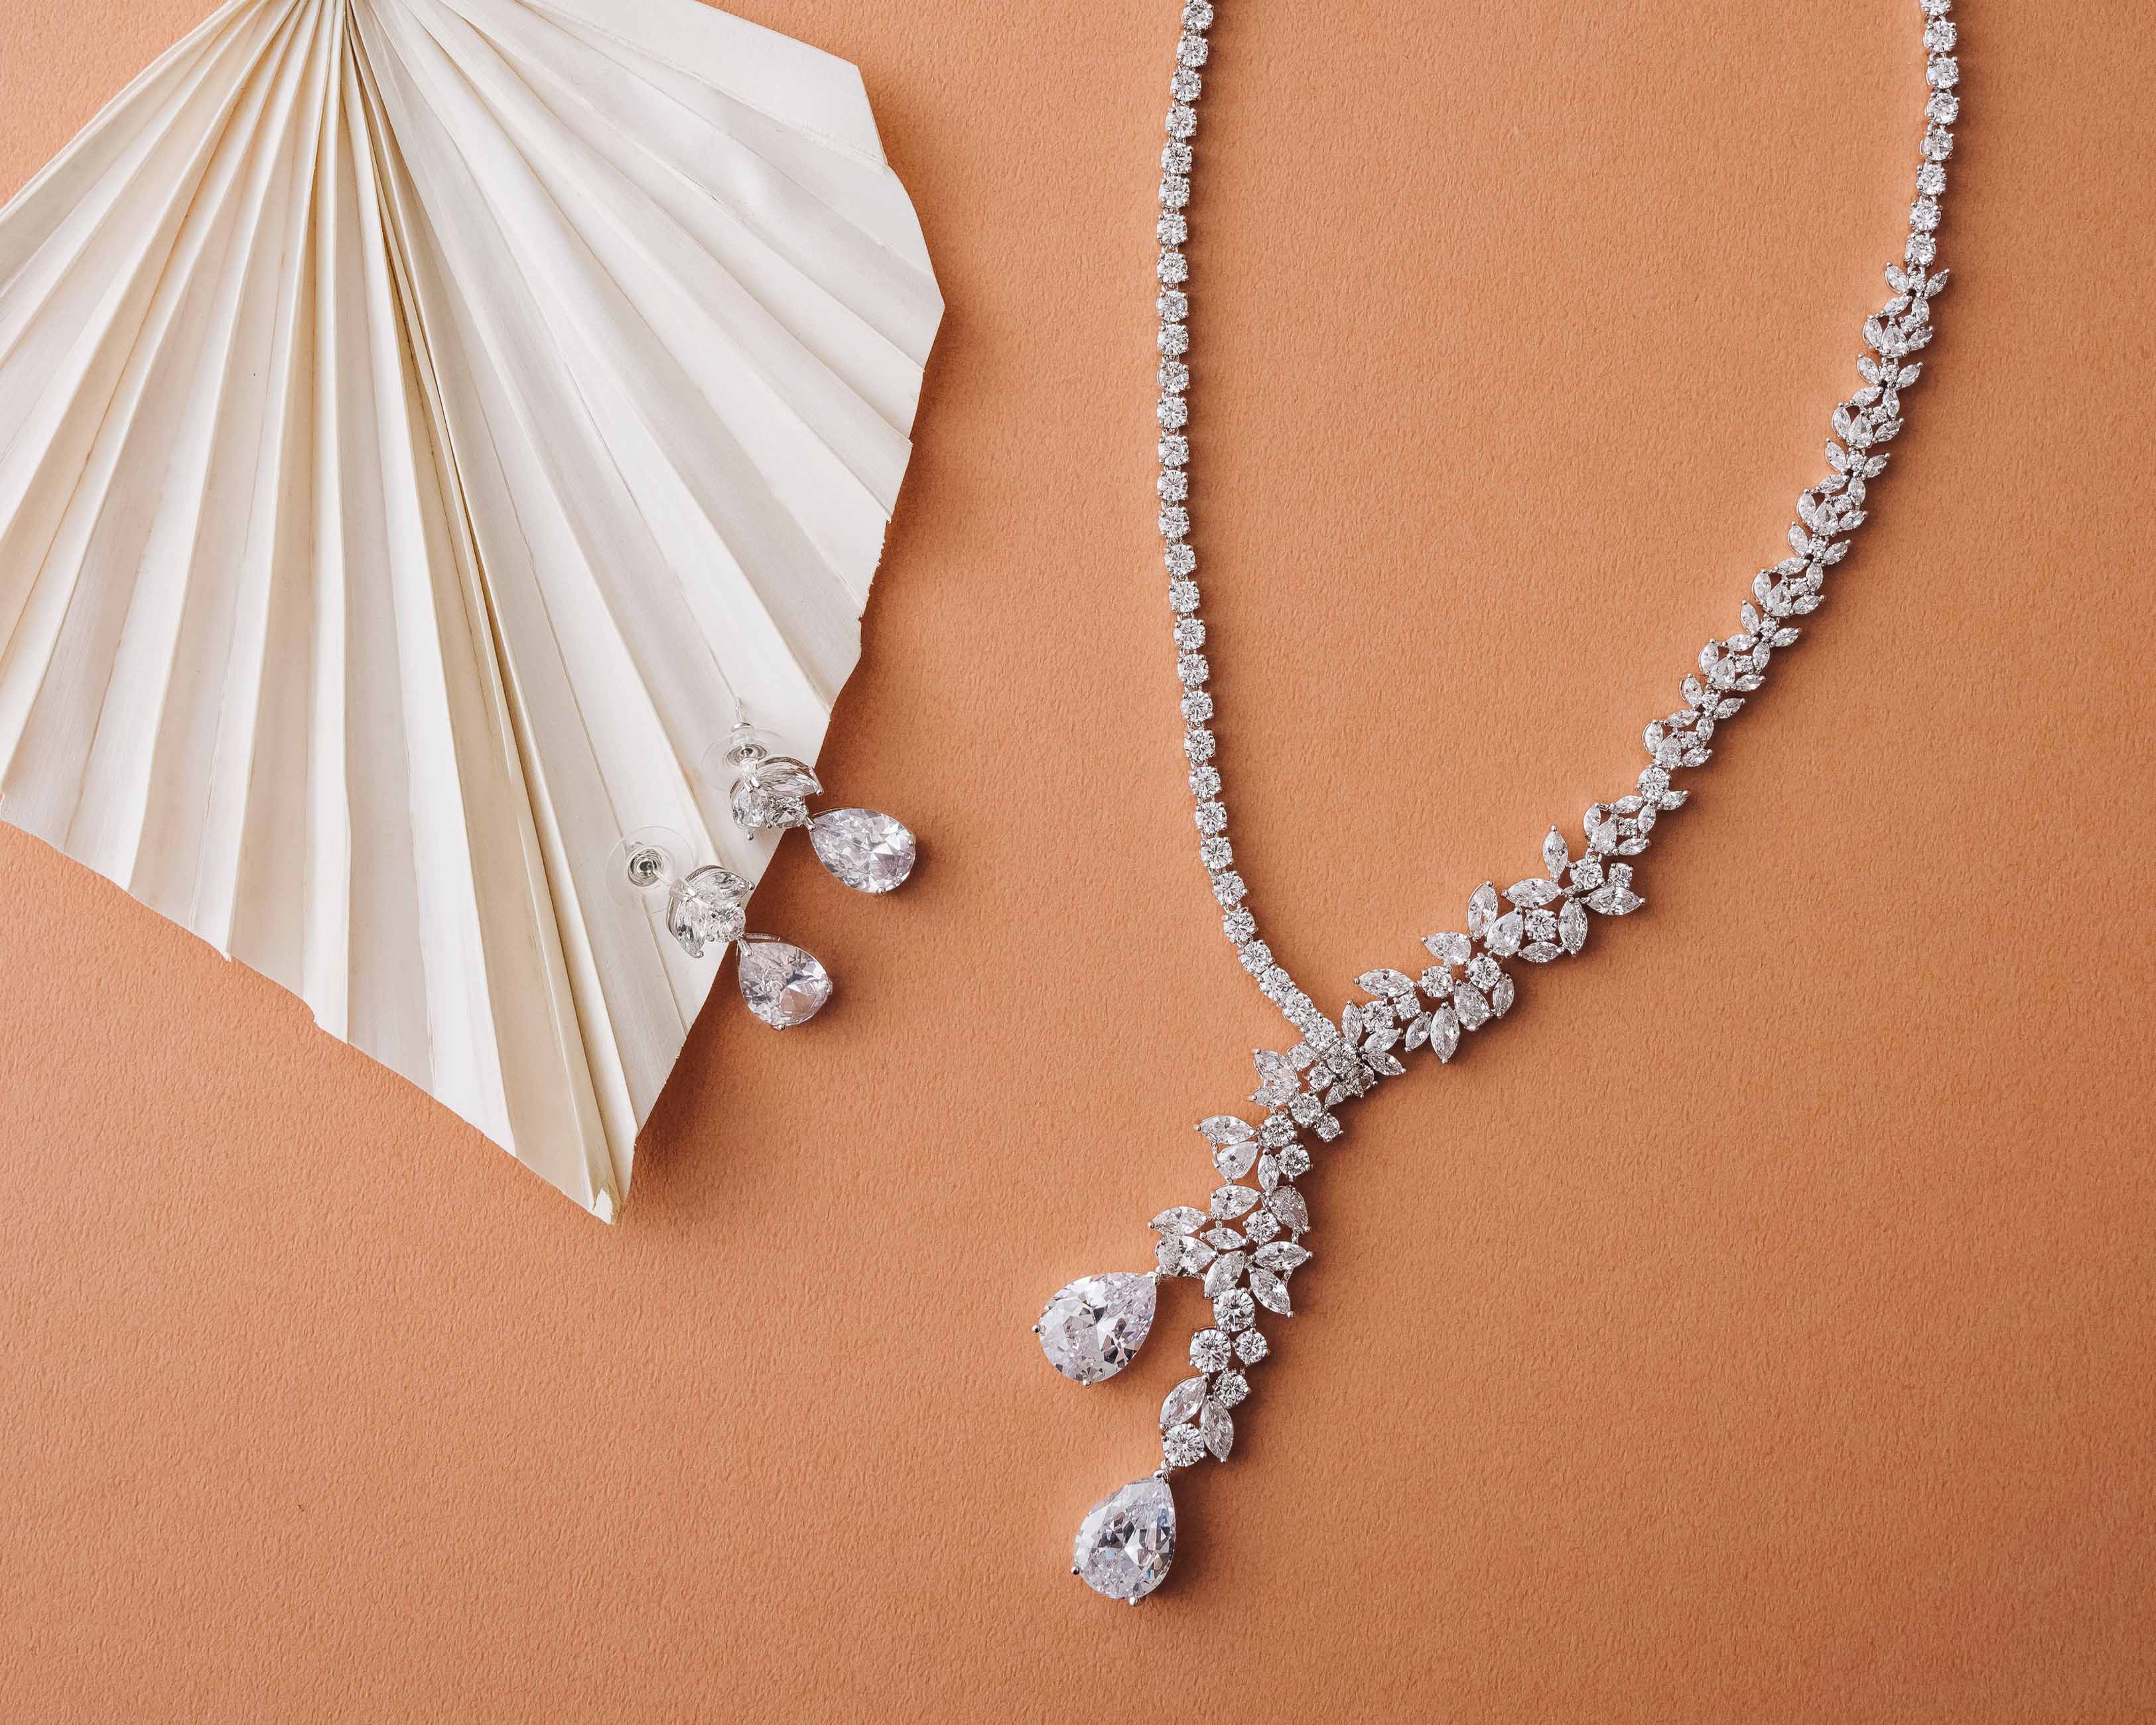 Silver Bridal Necklace and Earrings Set - The perfect wedding jewelry.